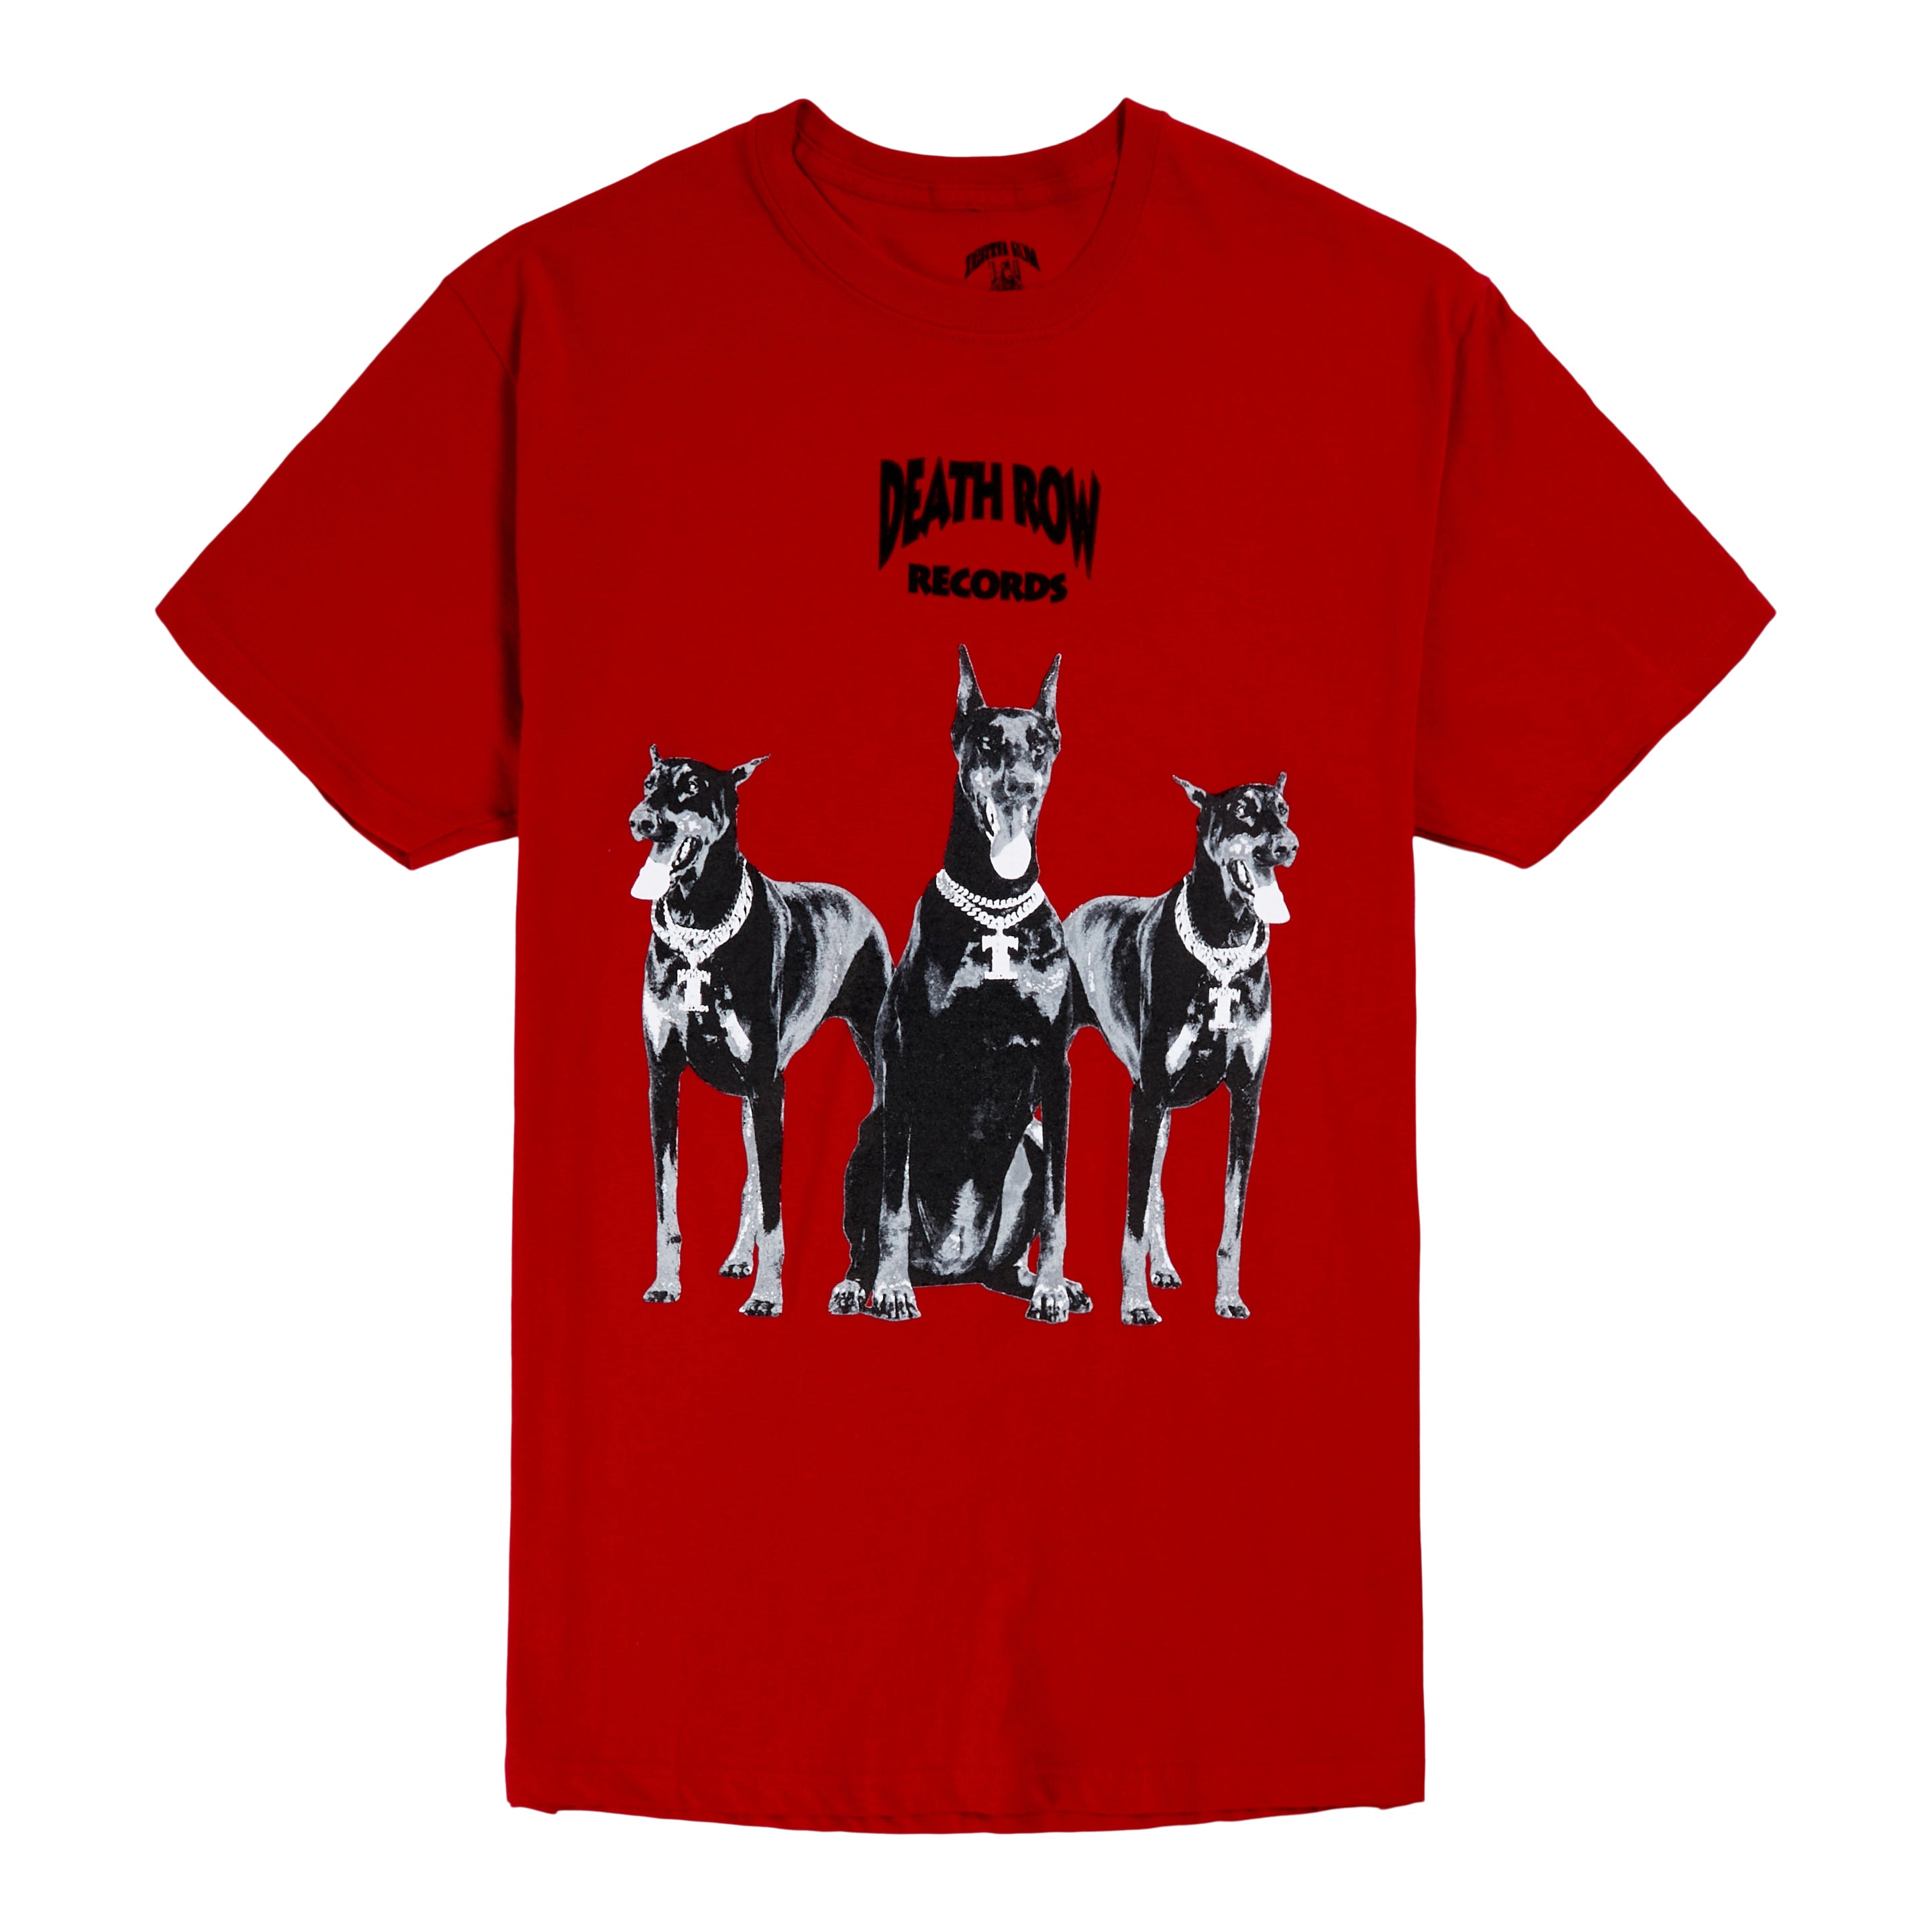 Death Row Records Clothing & Merch